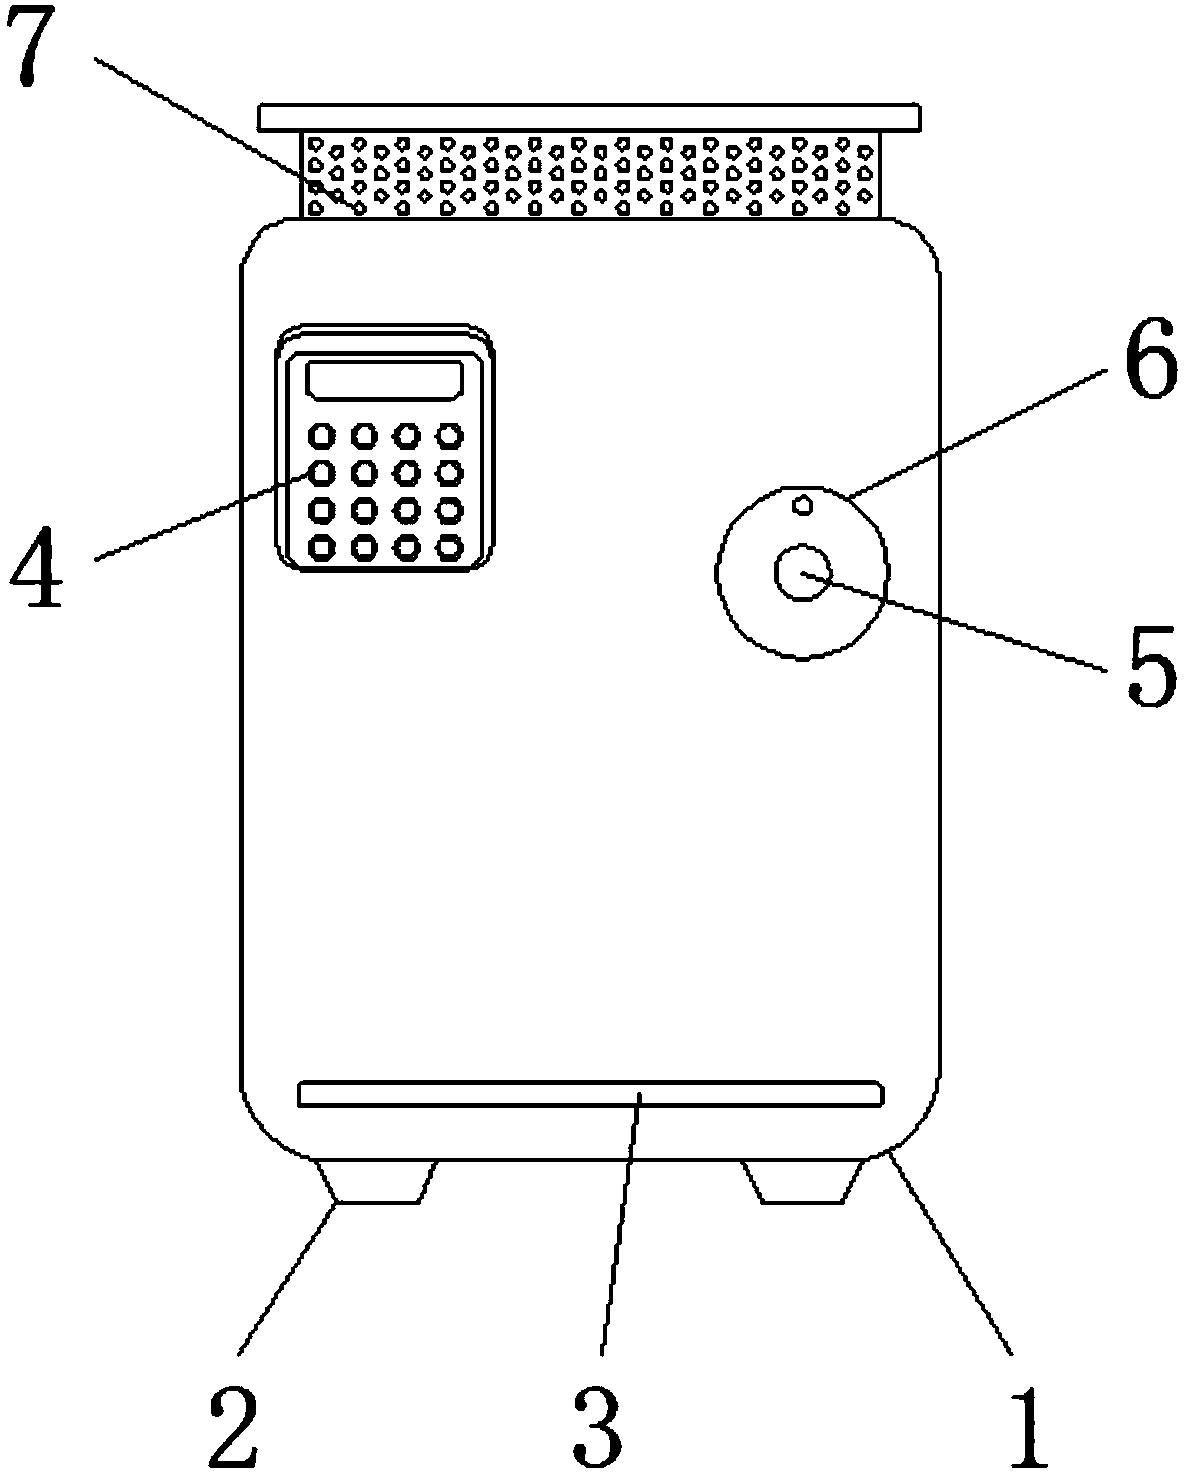 Reed leaf cooking and drying device with function of reed leaf damage prevention